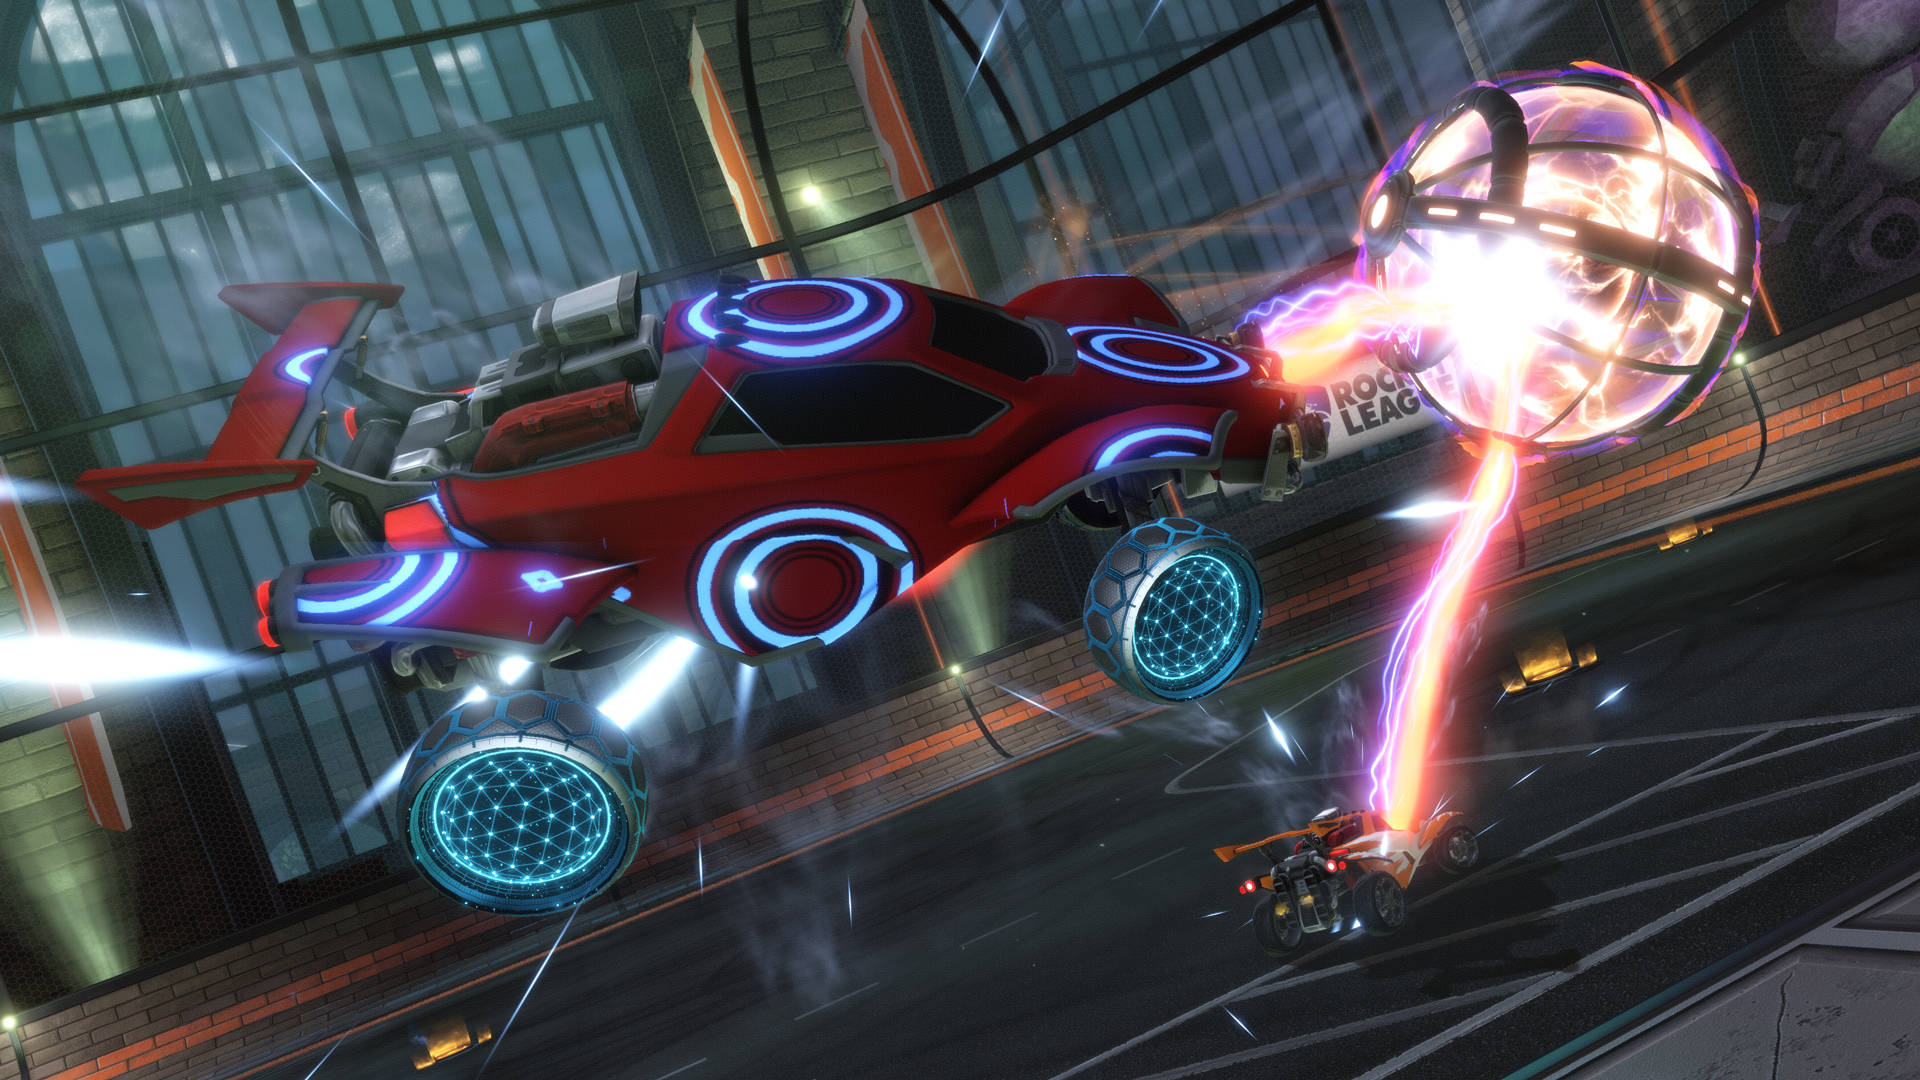 Rocket League trading: A red car with glowing blue rings and wheels smashing into an orange glowing football. 